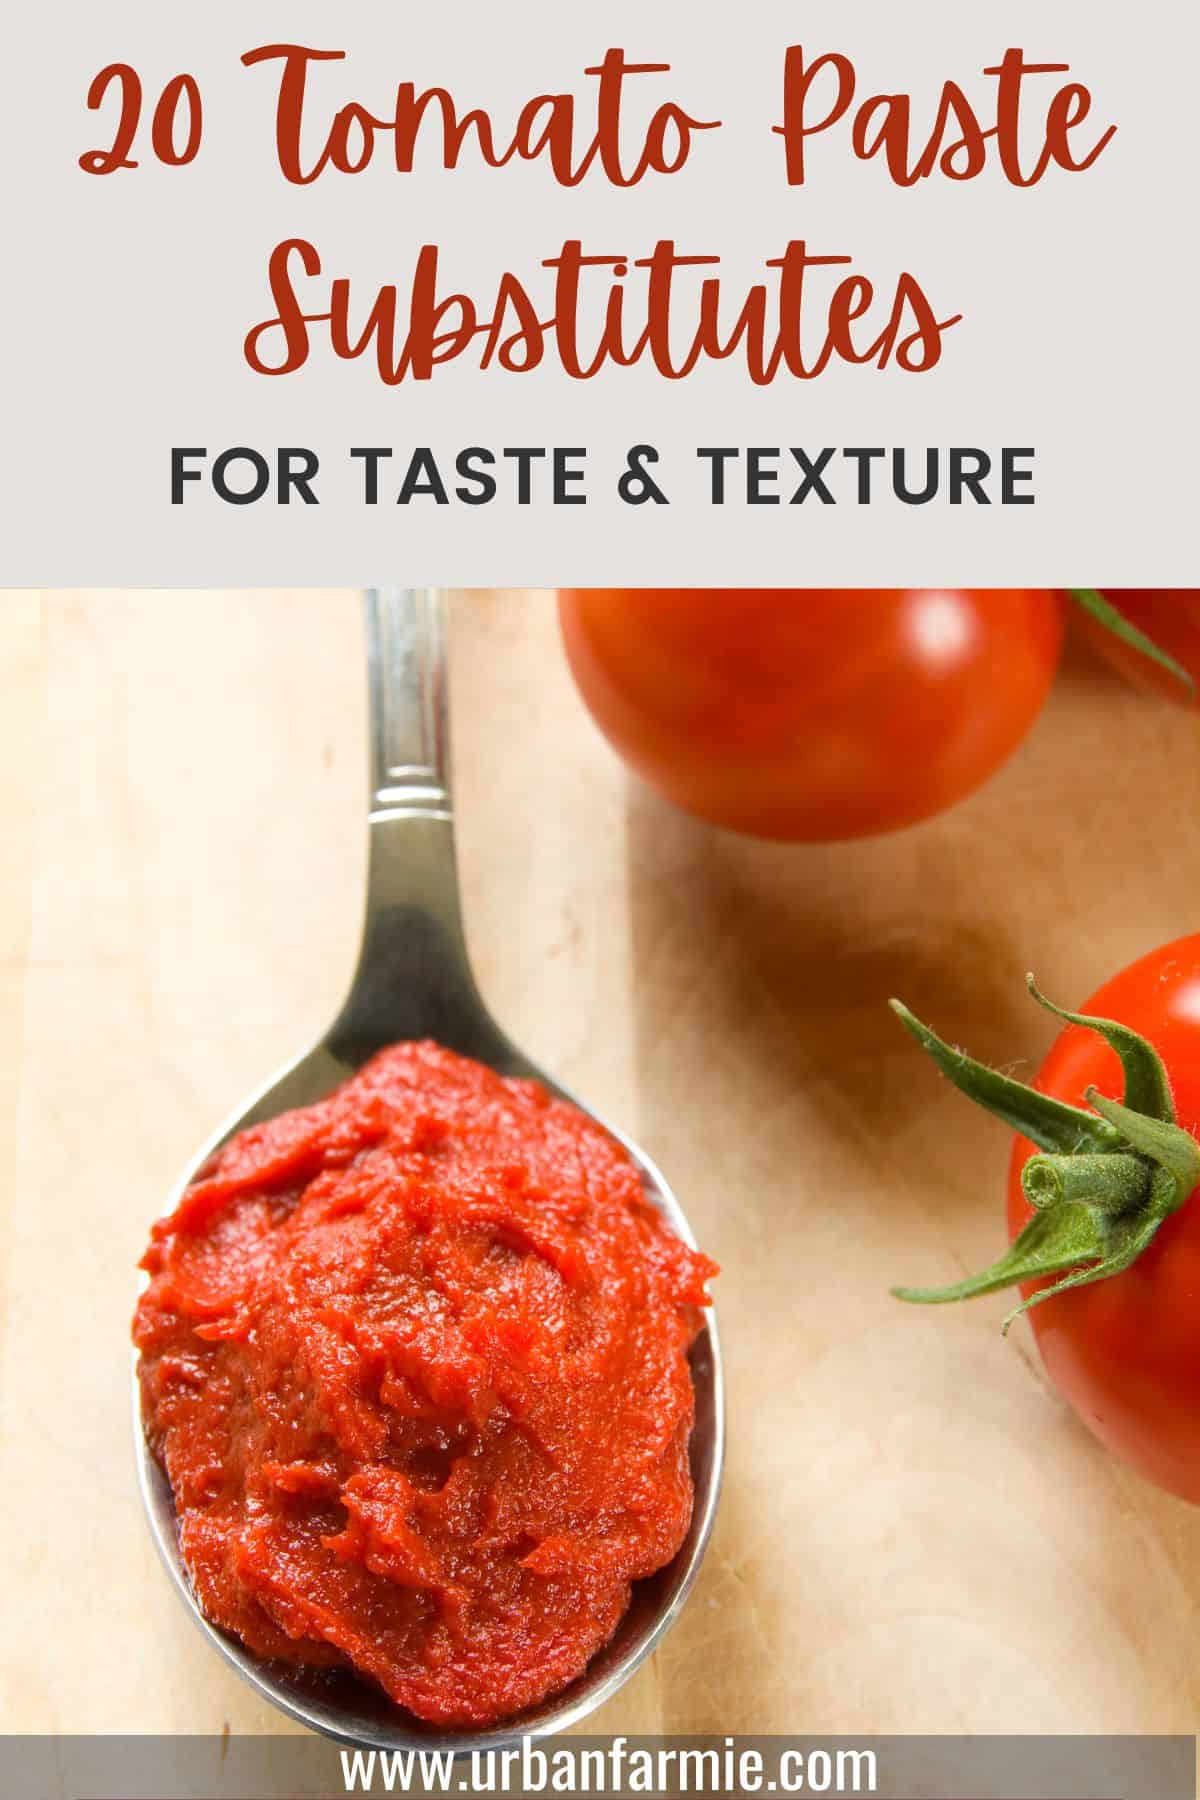 Featured image showing spoonful of tomato paste, with text overlay of the post title.